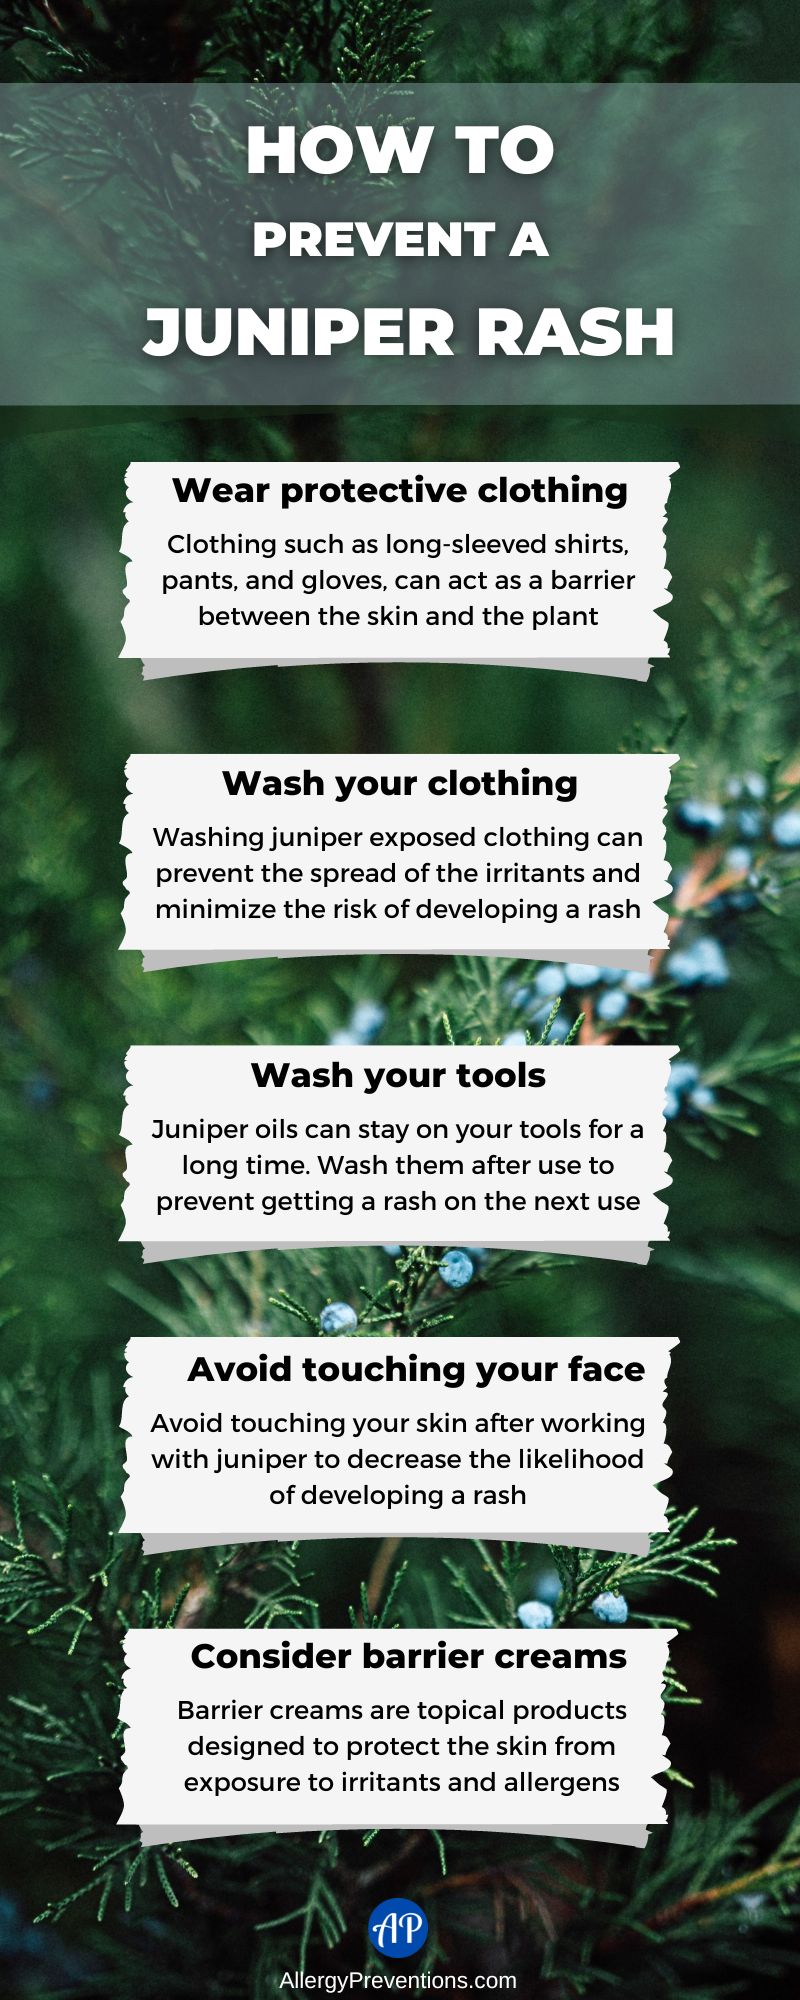 How to prevent a juniper rash infographic. To prevent a juniper tree rash: Wear protective clothing, wash your clothing, wash your tools, avoid touching your face, and consider using barrier creams.